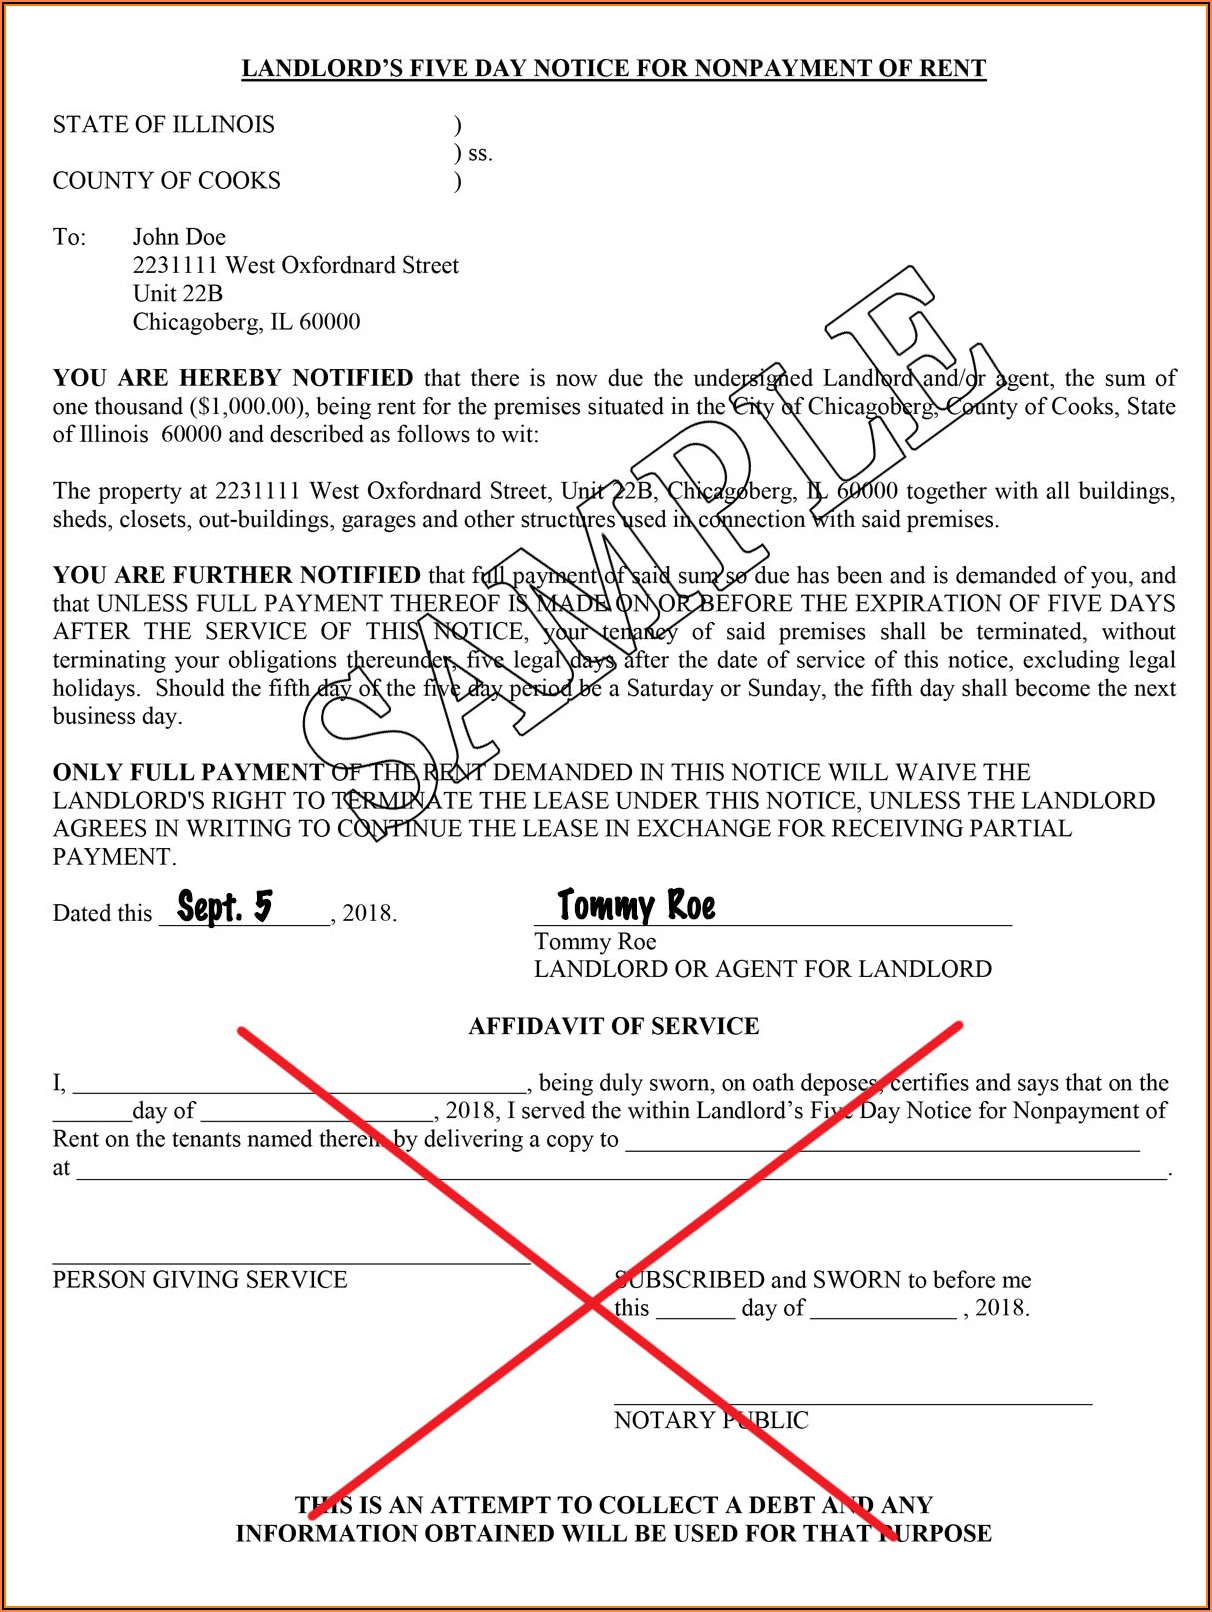 Cook County Il Quit Claim Deed Form